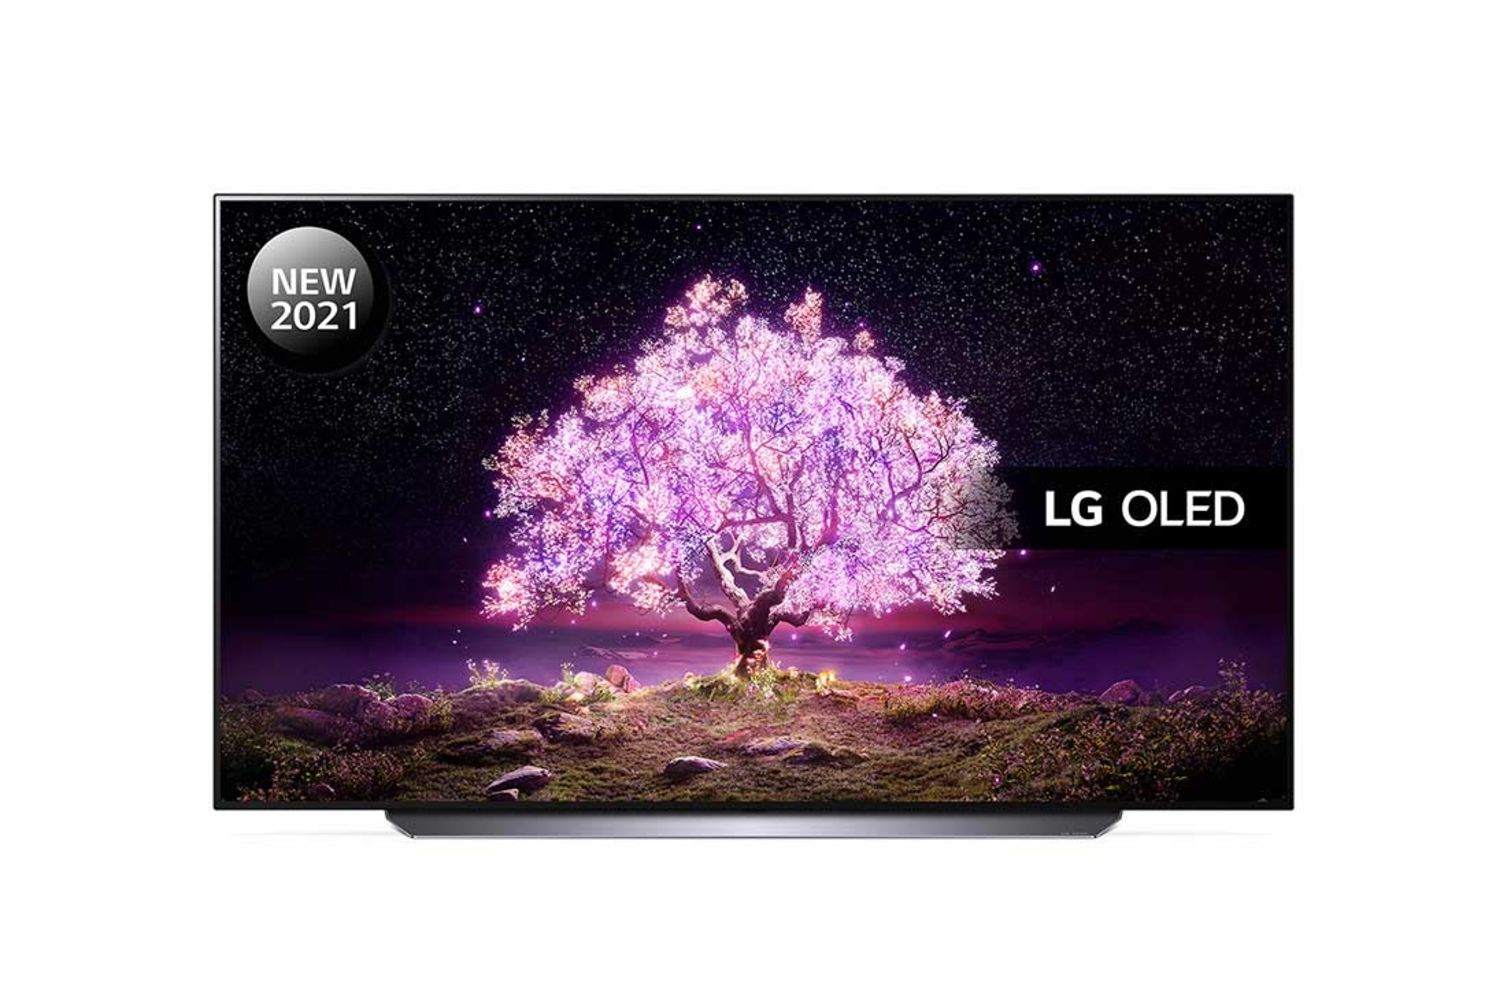 Technology Stock Inc LG OLED TV's, HP Laptops, Refurbed and Graded Lots From Distributors and Manufacturers